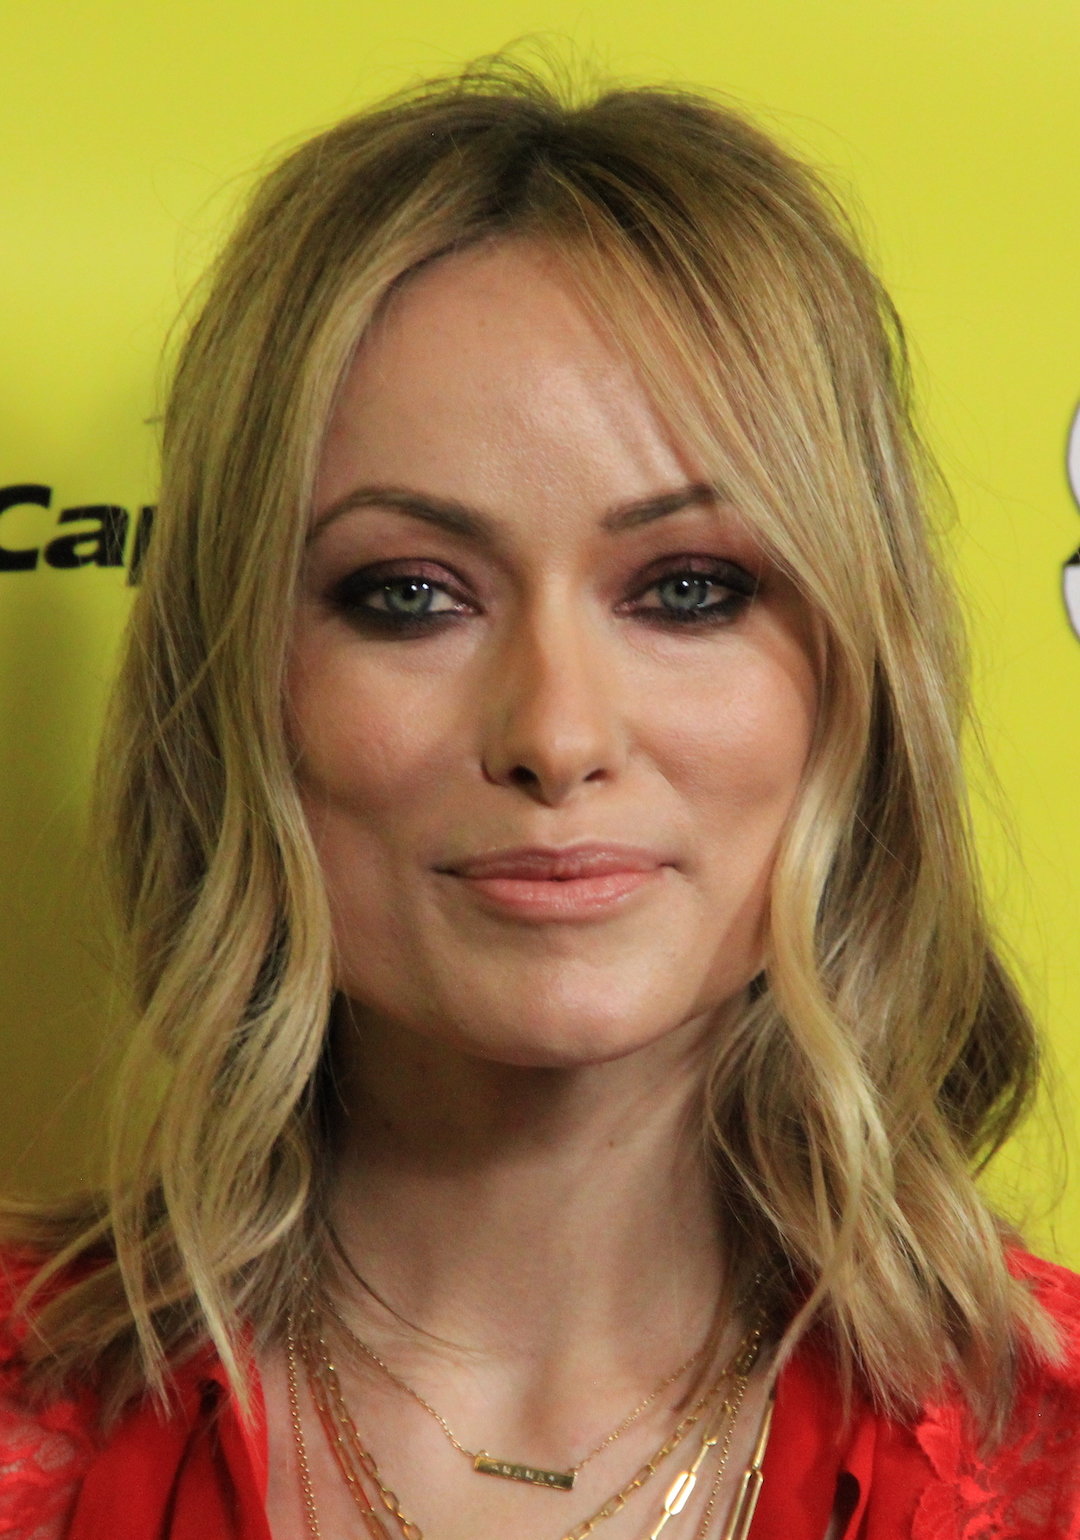 DannyB Photos - https://www.flickr.com/photos/52309209@N02/47346791461/
South by Southwest 2019
CC BY 2.0
File:Olivia Wilde at SXSW Booksmart Red Carpet (cropped).jpg